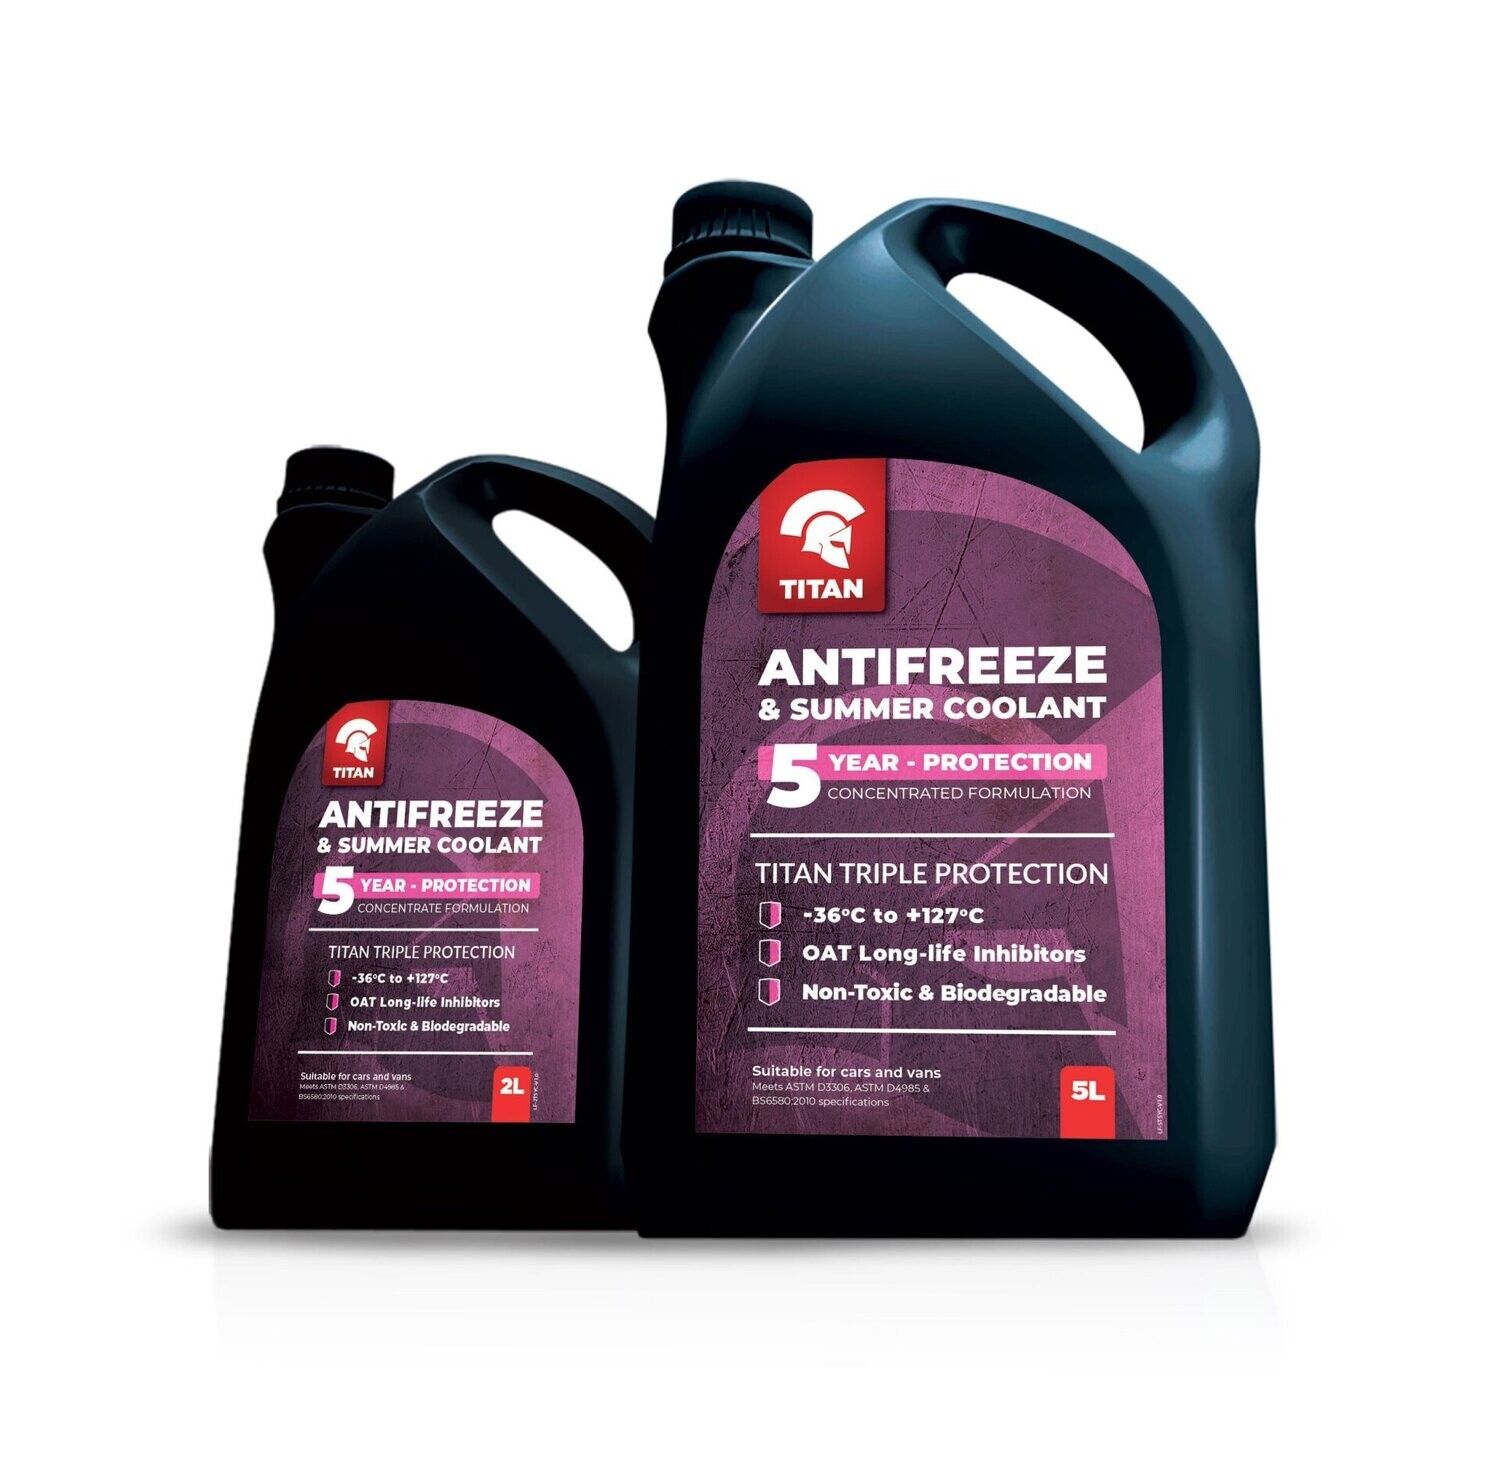 TITAN 5 YEAR ANTIFREEZE AND SUMMER COOLANT CONCENTRATE
2 Litres